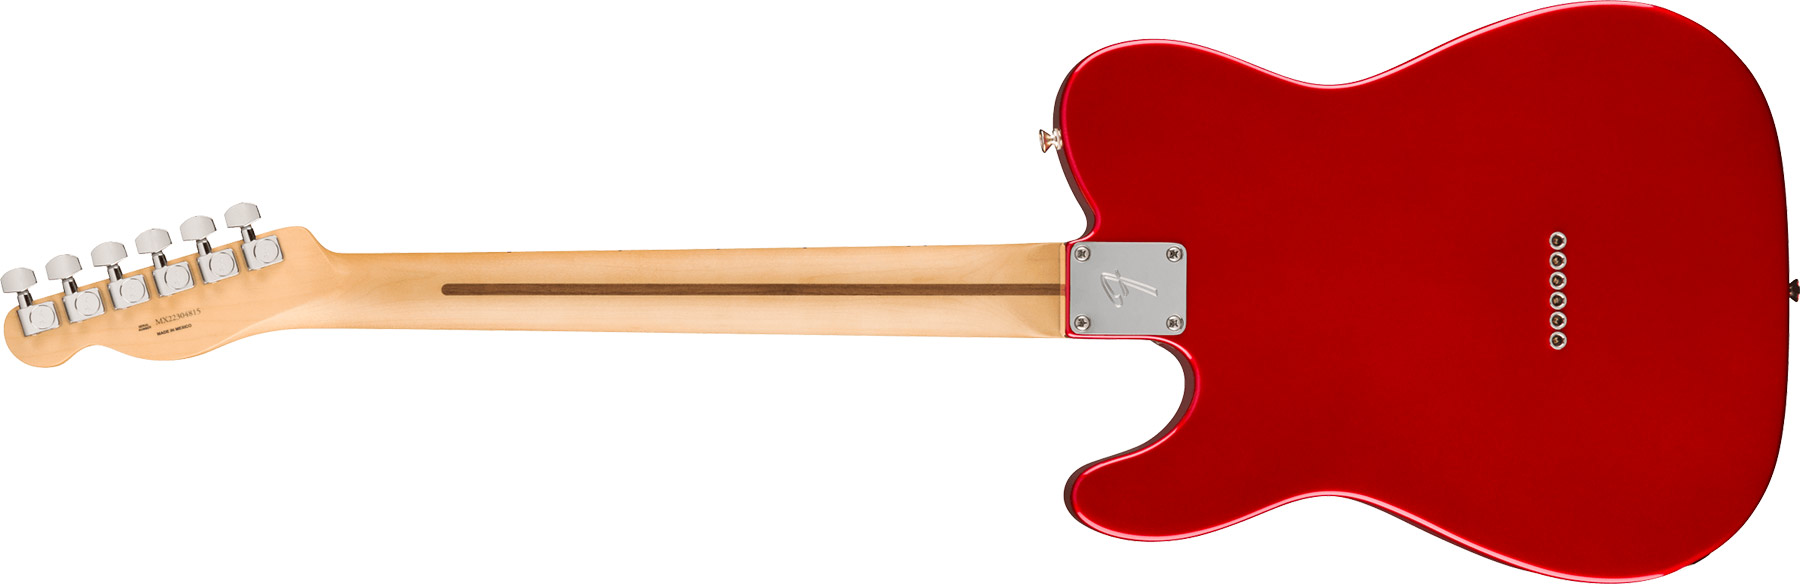 Fender Tele Player Mex 2023 2s Ht Mn - Candy Apple Red - Tel shape electric guitar - Variation 1